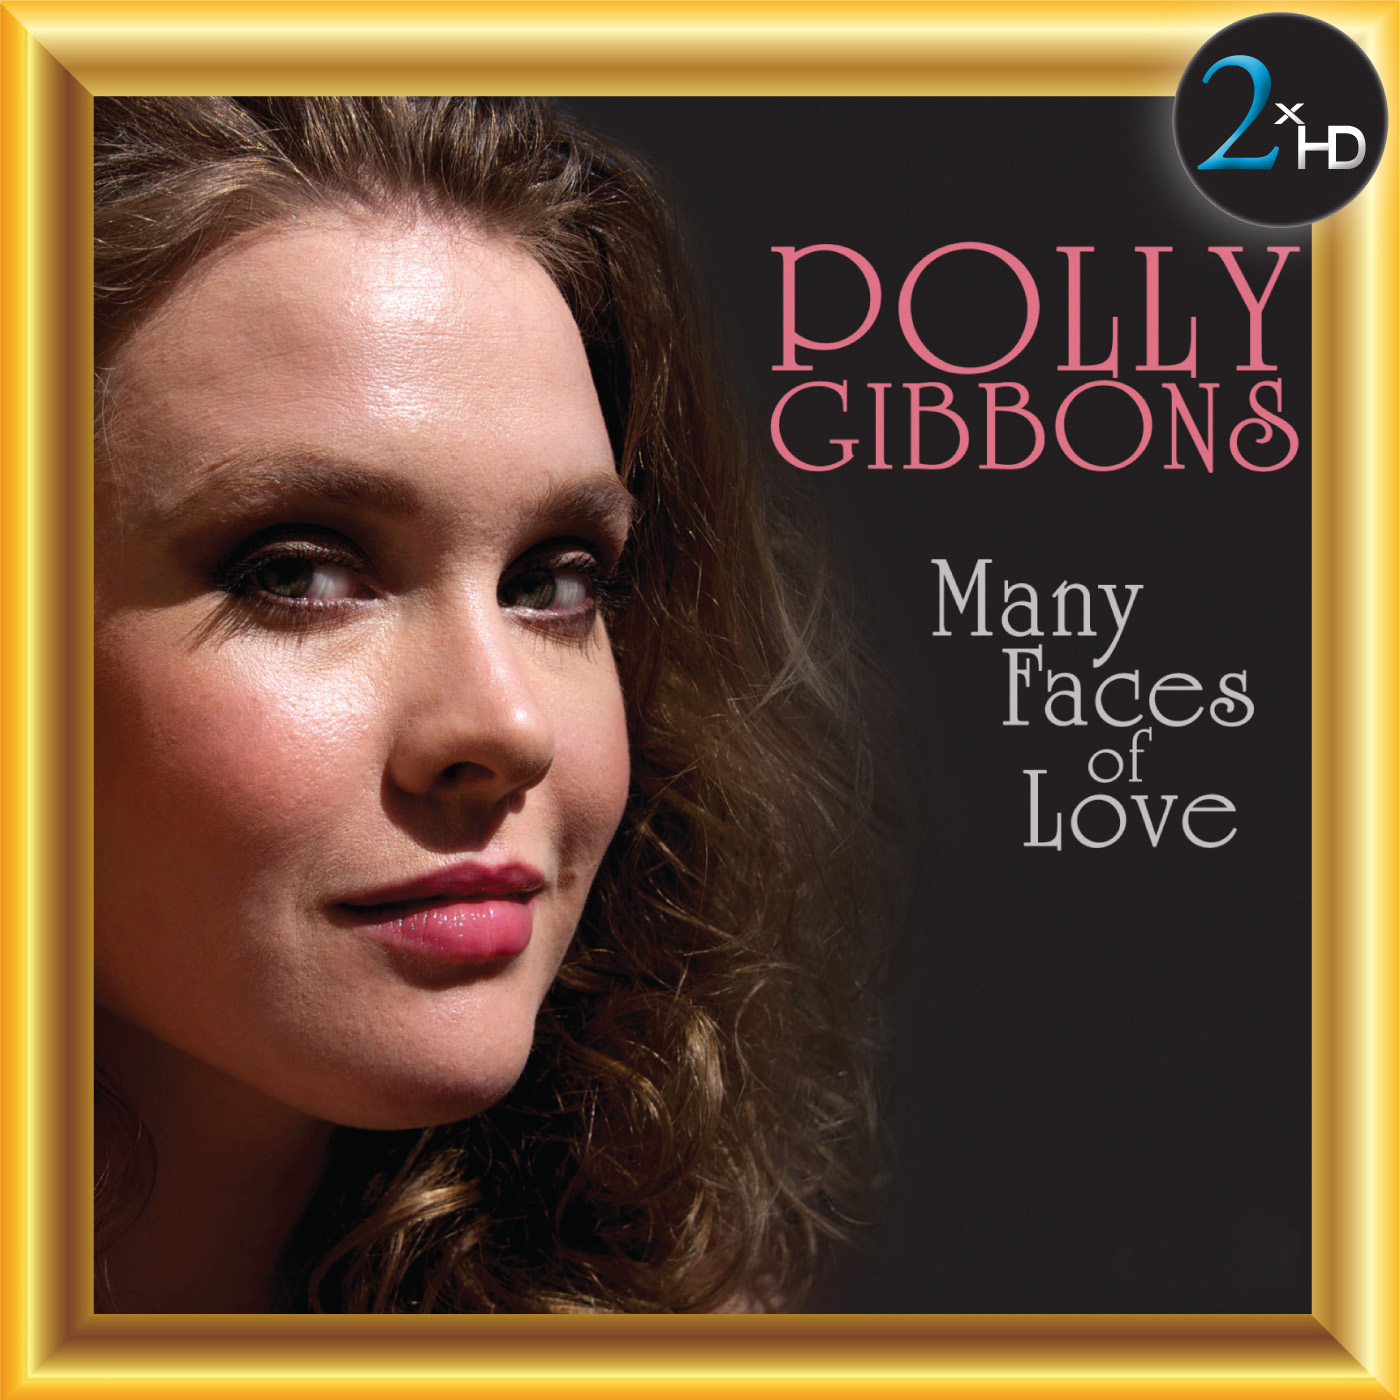 Polly Gibbons - Many Faces Of Love (2015/2016) [HDTracks FLAC 24bit/48kHz]